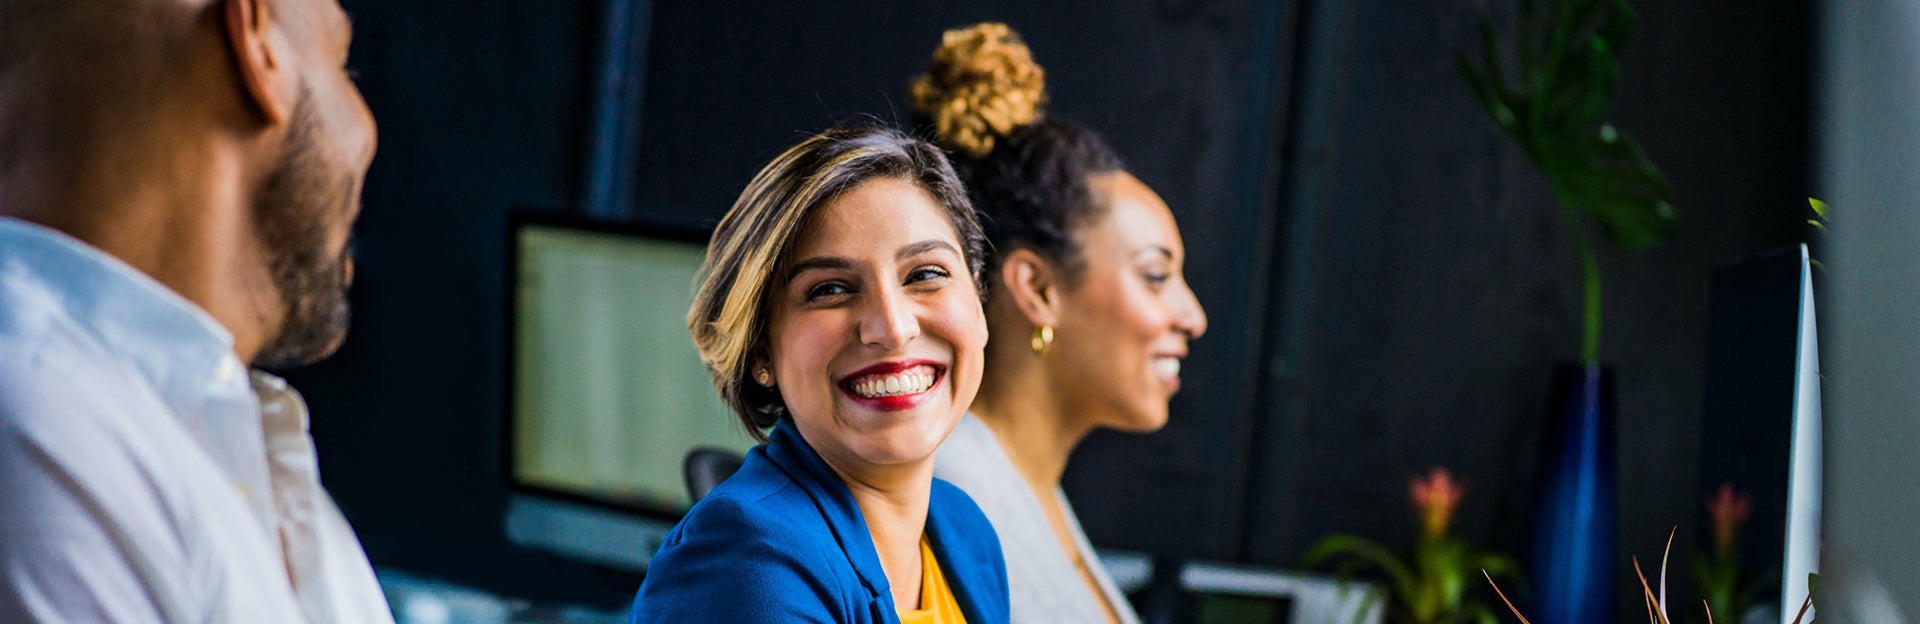 woman smiling at man seated next to her (c) Jopwell pexels